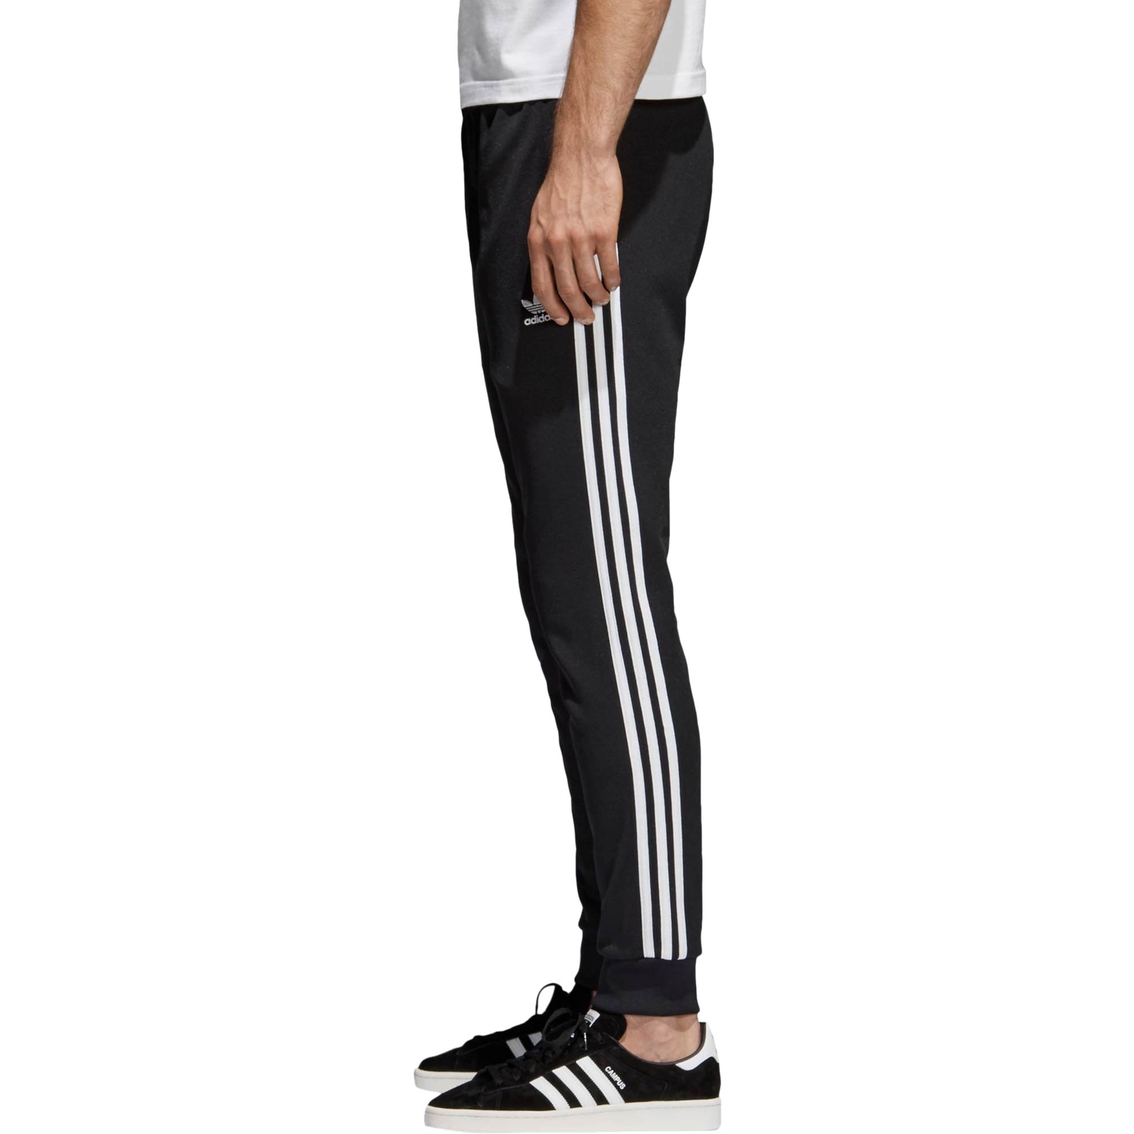 adidas SST Trackpants - Image 3 of 4